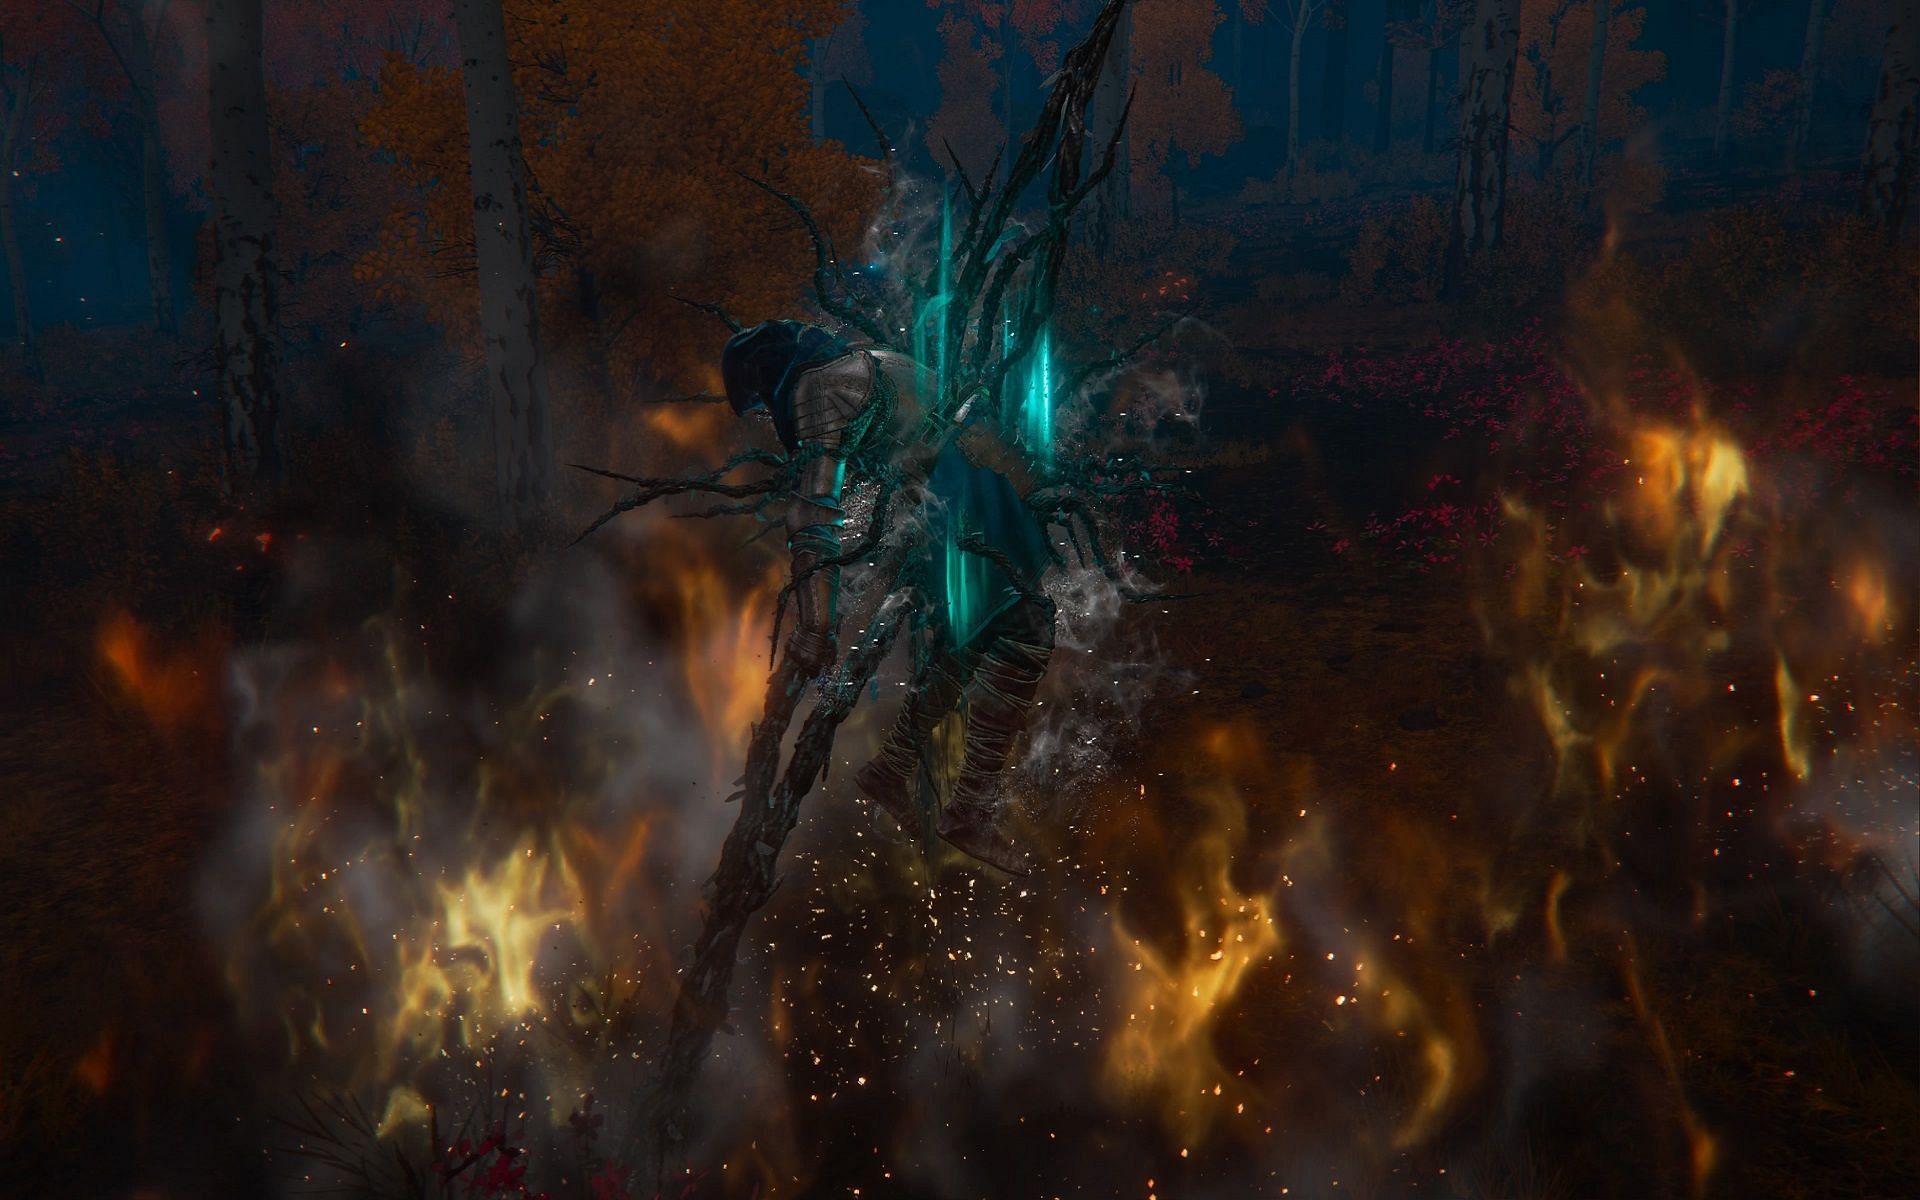 Death Blight causes a gruesome death in Elden Ring (Image via FromSoftware)